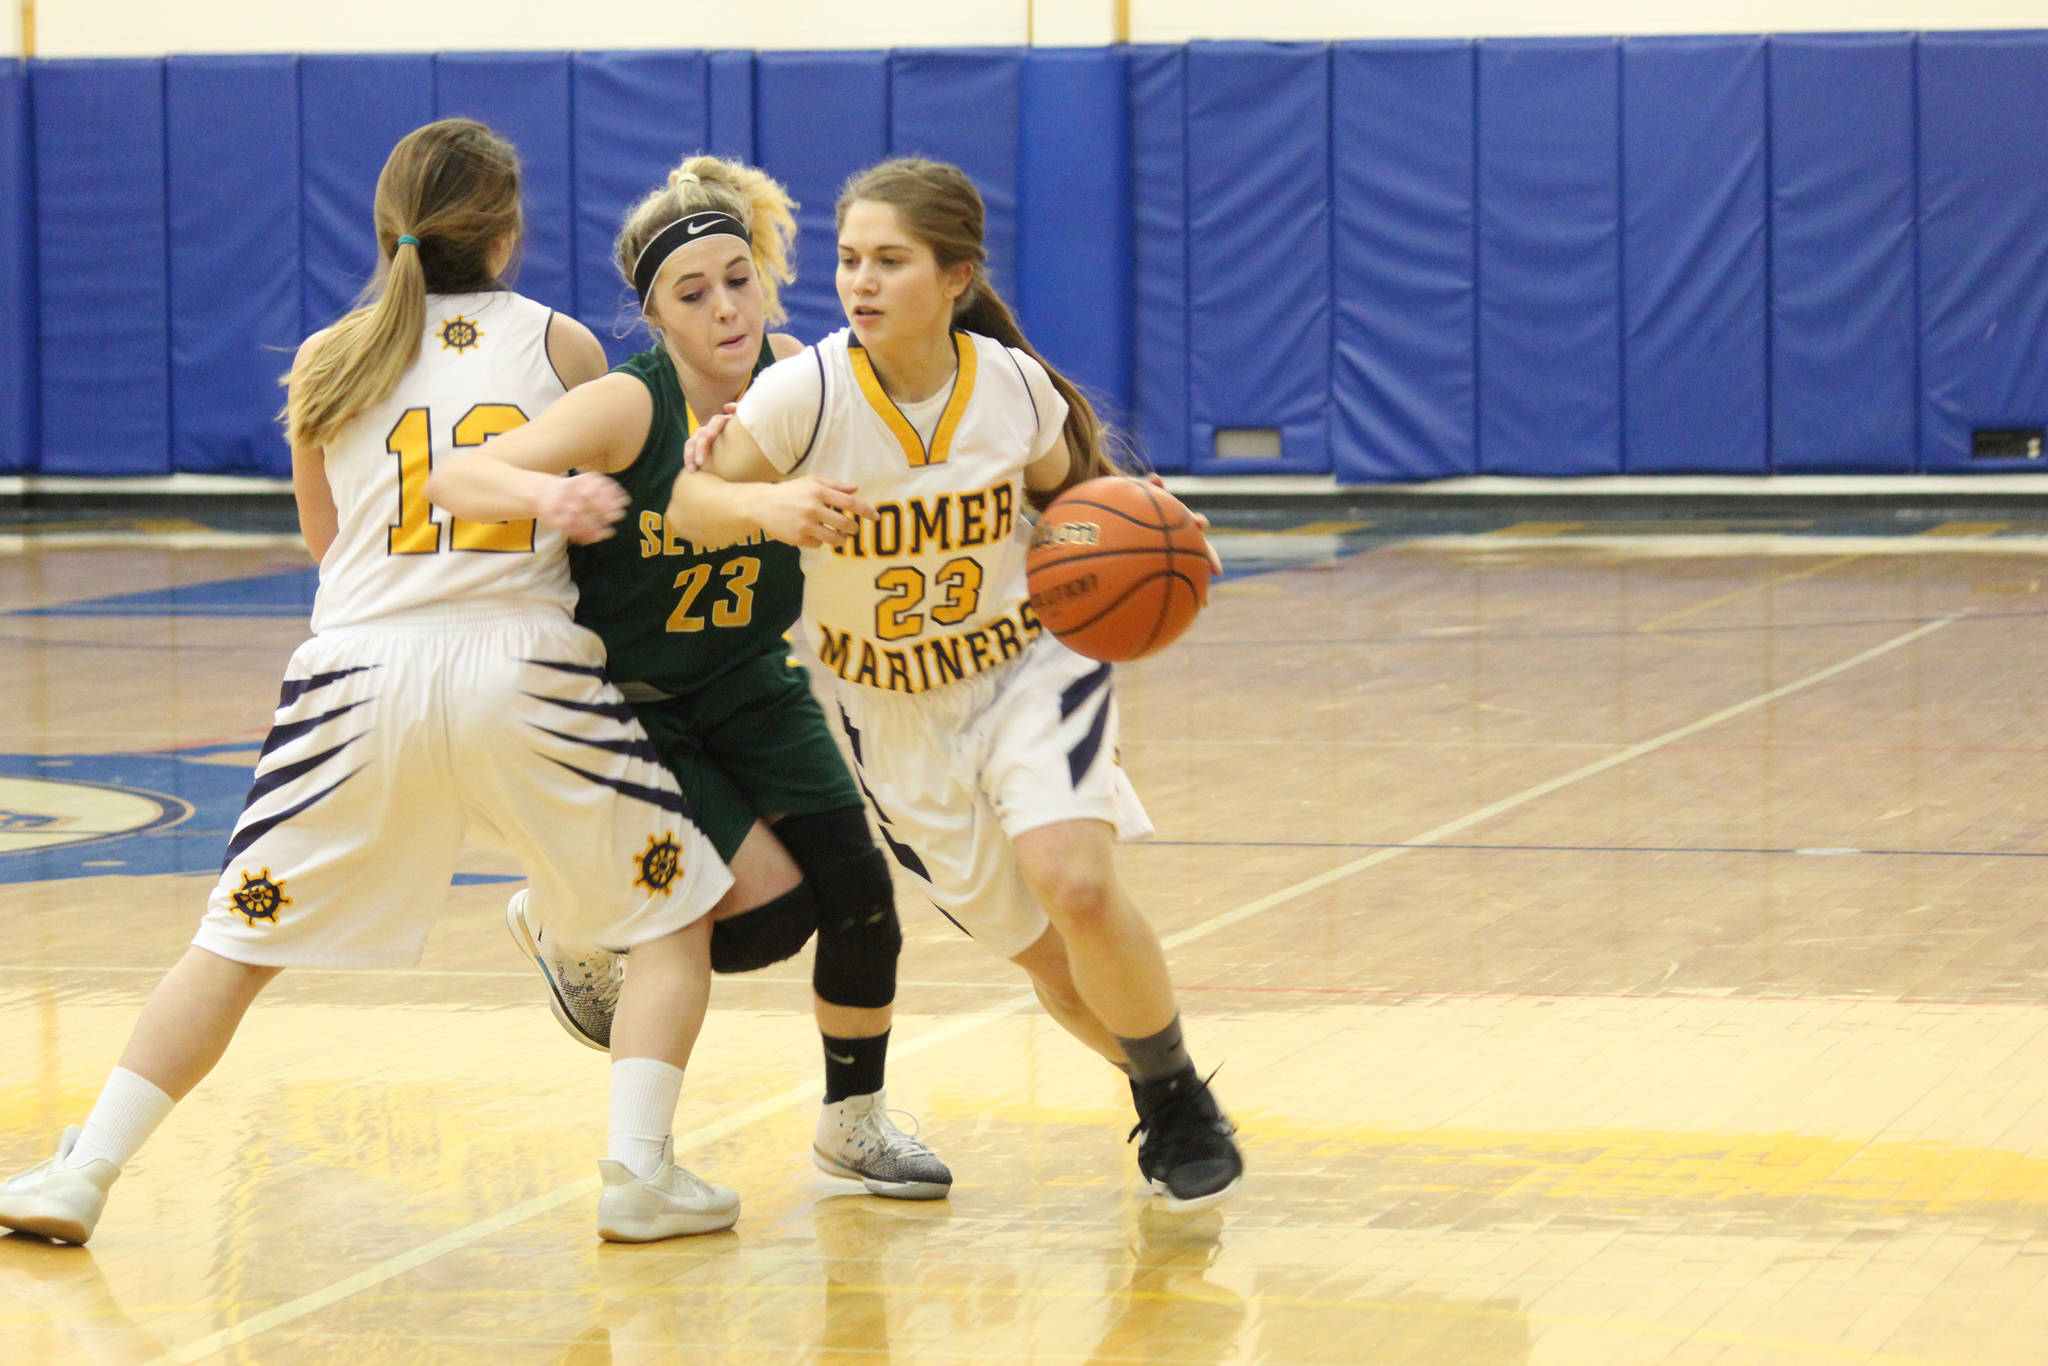 Homer senior Maggie Box, far right, dribbles past a player from Seward High School during their game Friday, March 2, 2018 in Homer, Alaska. Box was one of two senior girls to play their last home game that night. (Photo by Megan Pacer/Homer News)